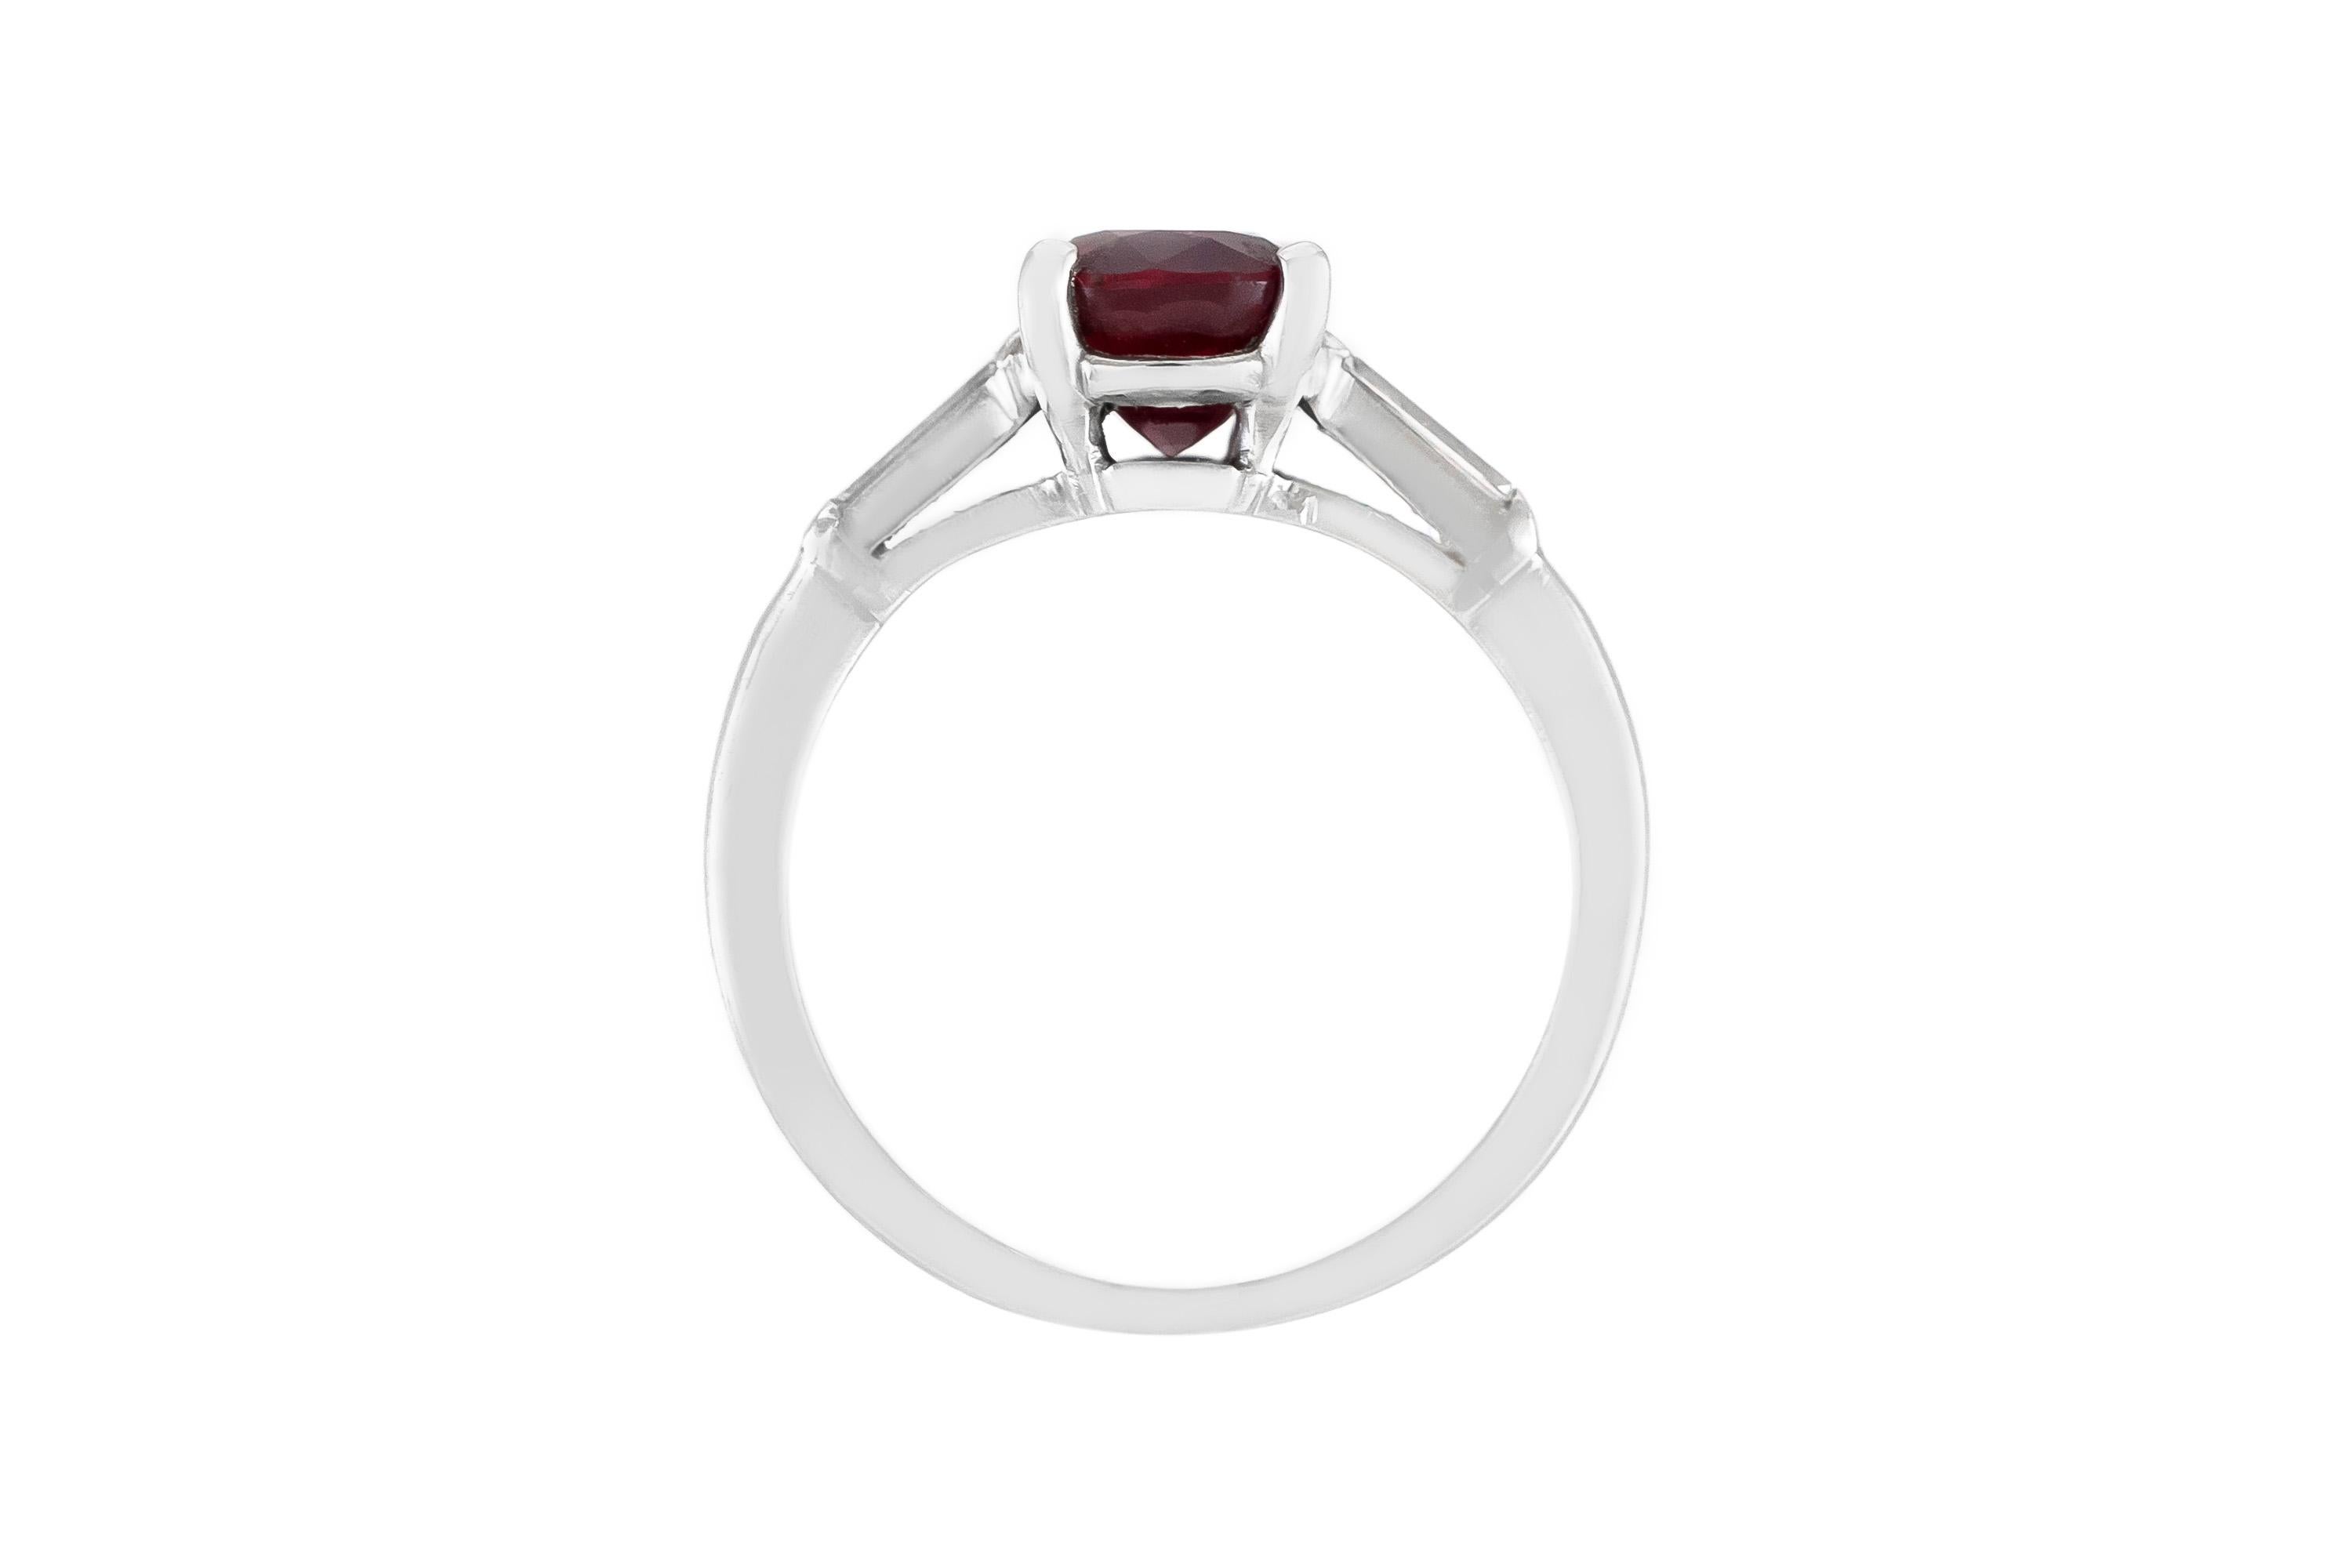 The ring is finely crafted in platinum with center ruby weighing approximately total of 1.43 carat and diamonds on the side weighing approximately total of 0.20 carat.
Circa 1950